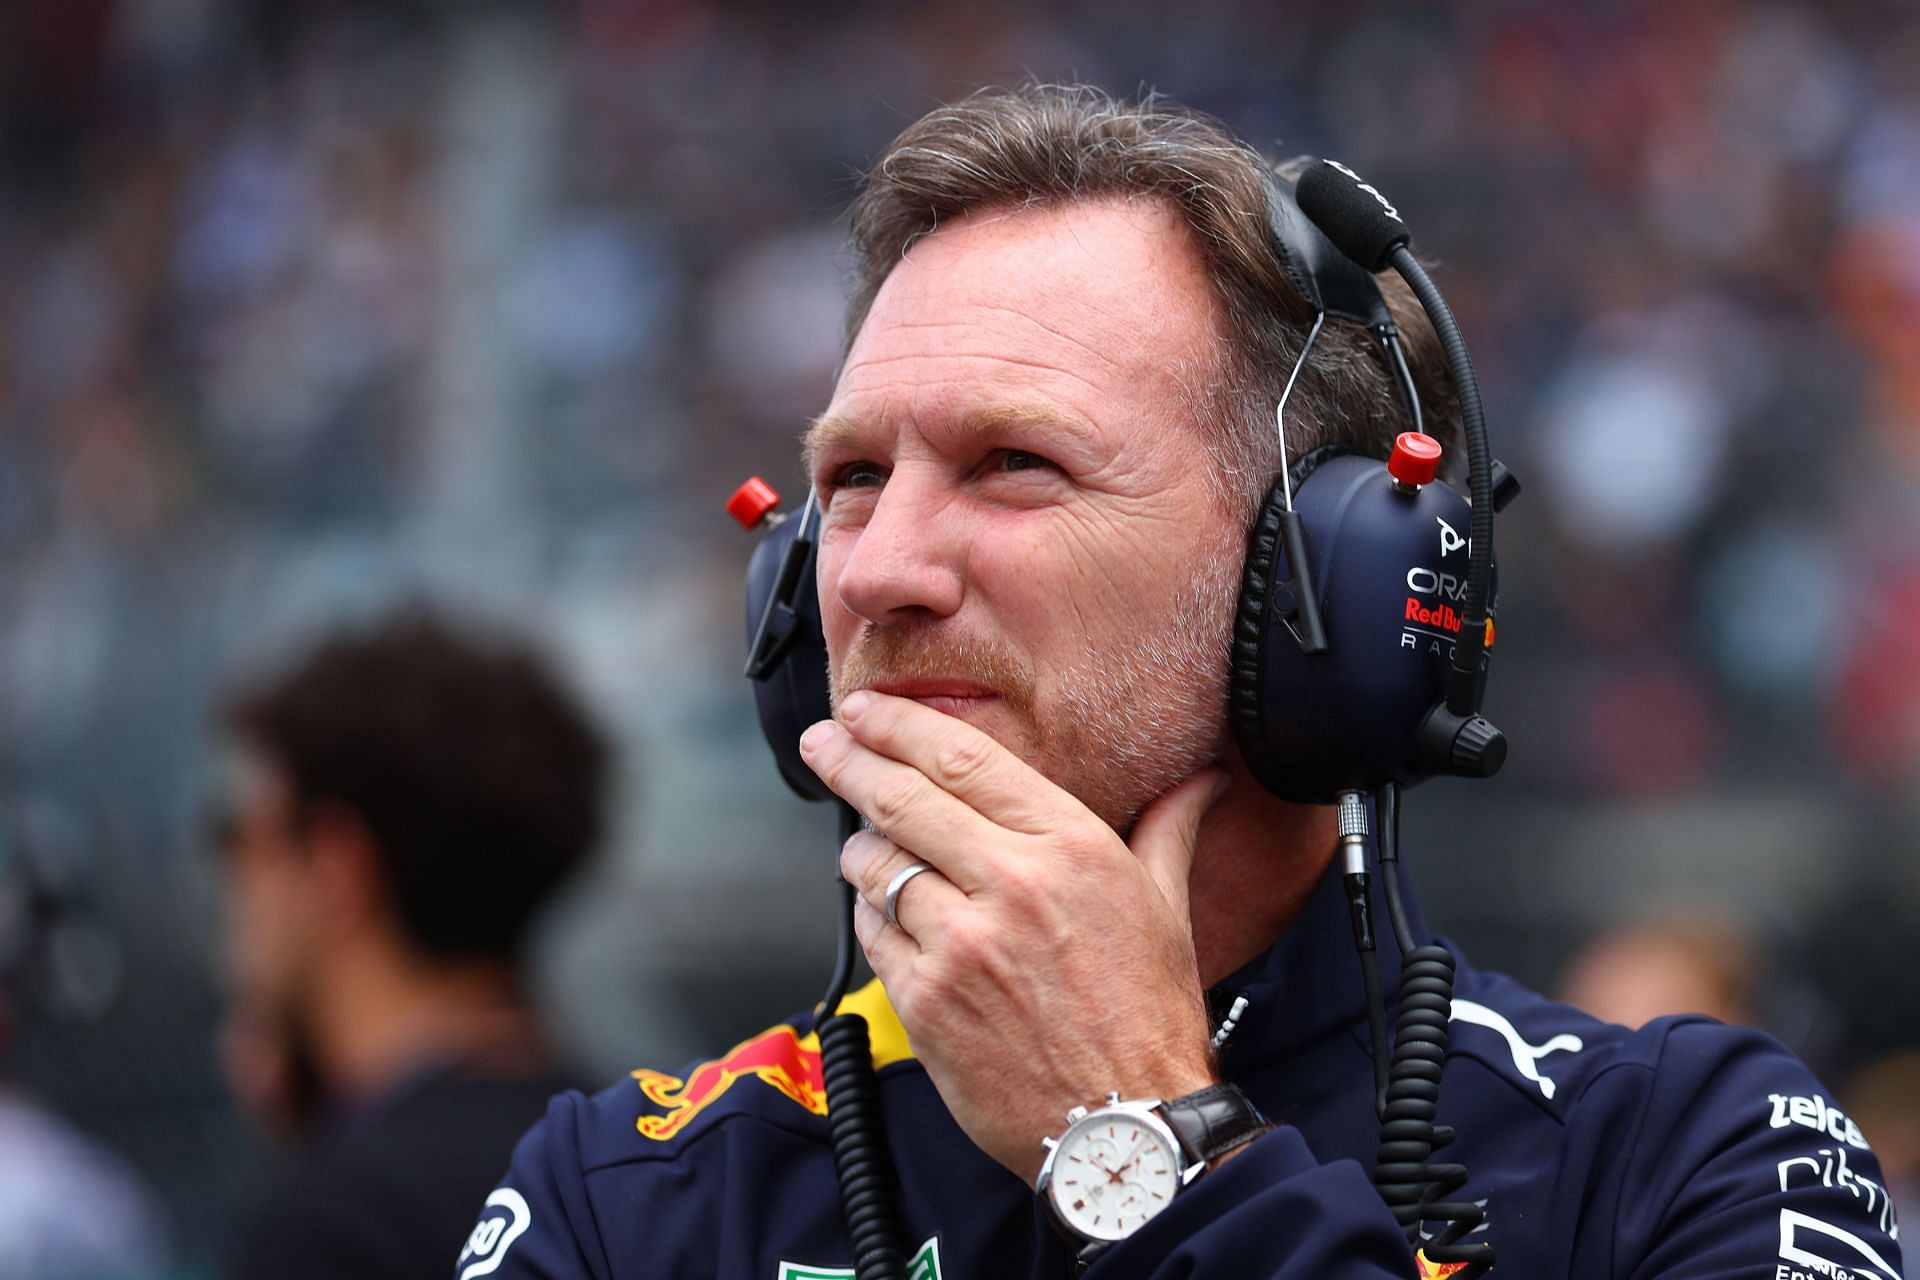 Red Bull Racing Team Principal Christian Horner looks on from the grid during the F1 Grand Prix of Austria. (Photo by Bryn Lennon/Getty Images)